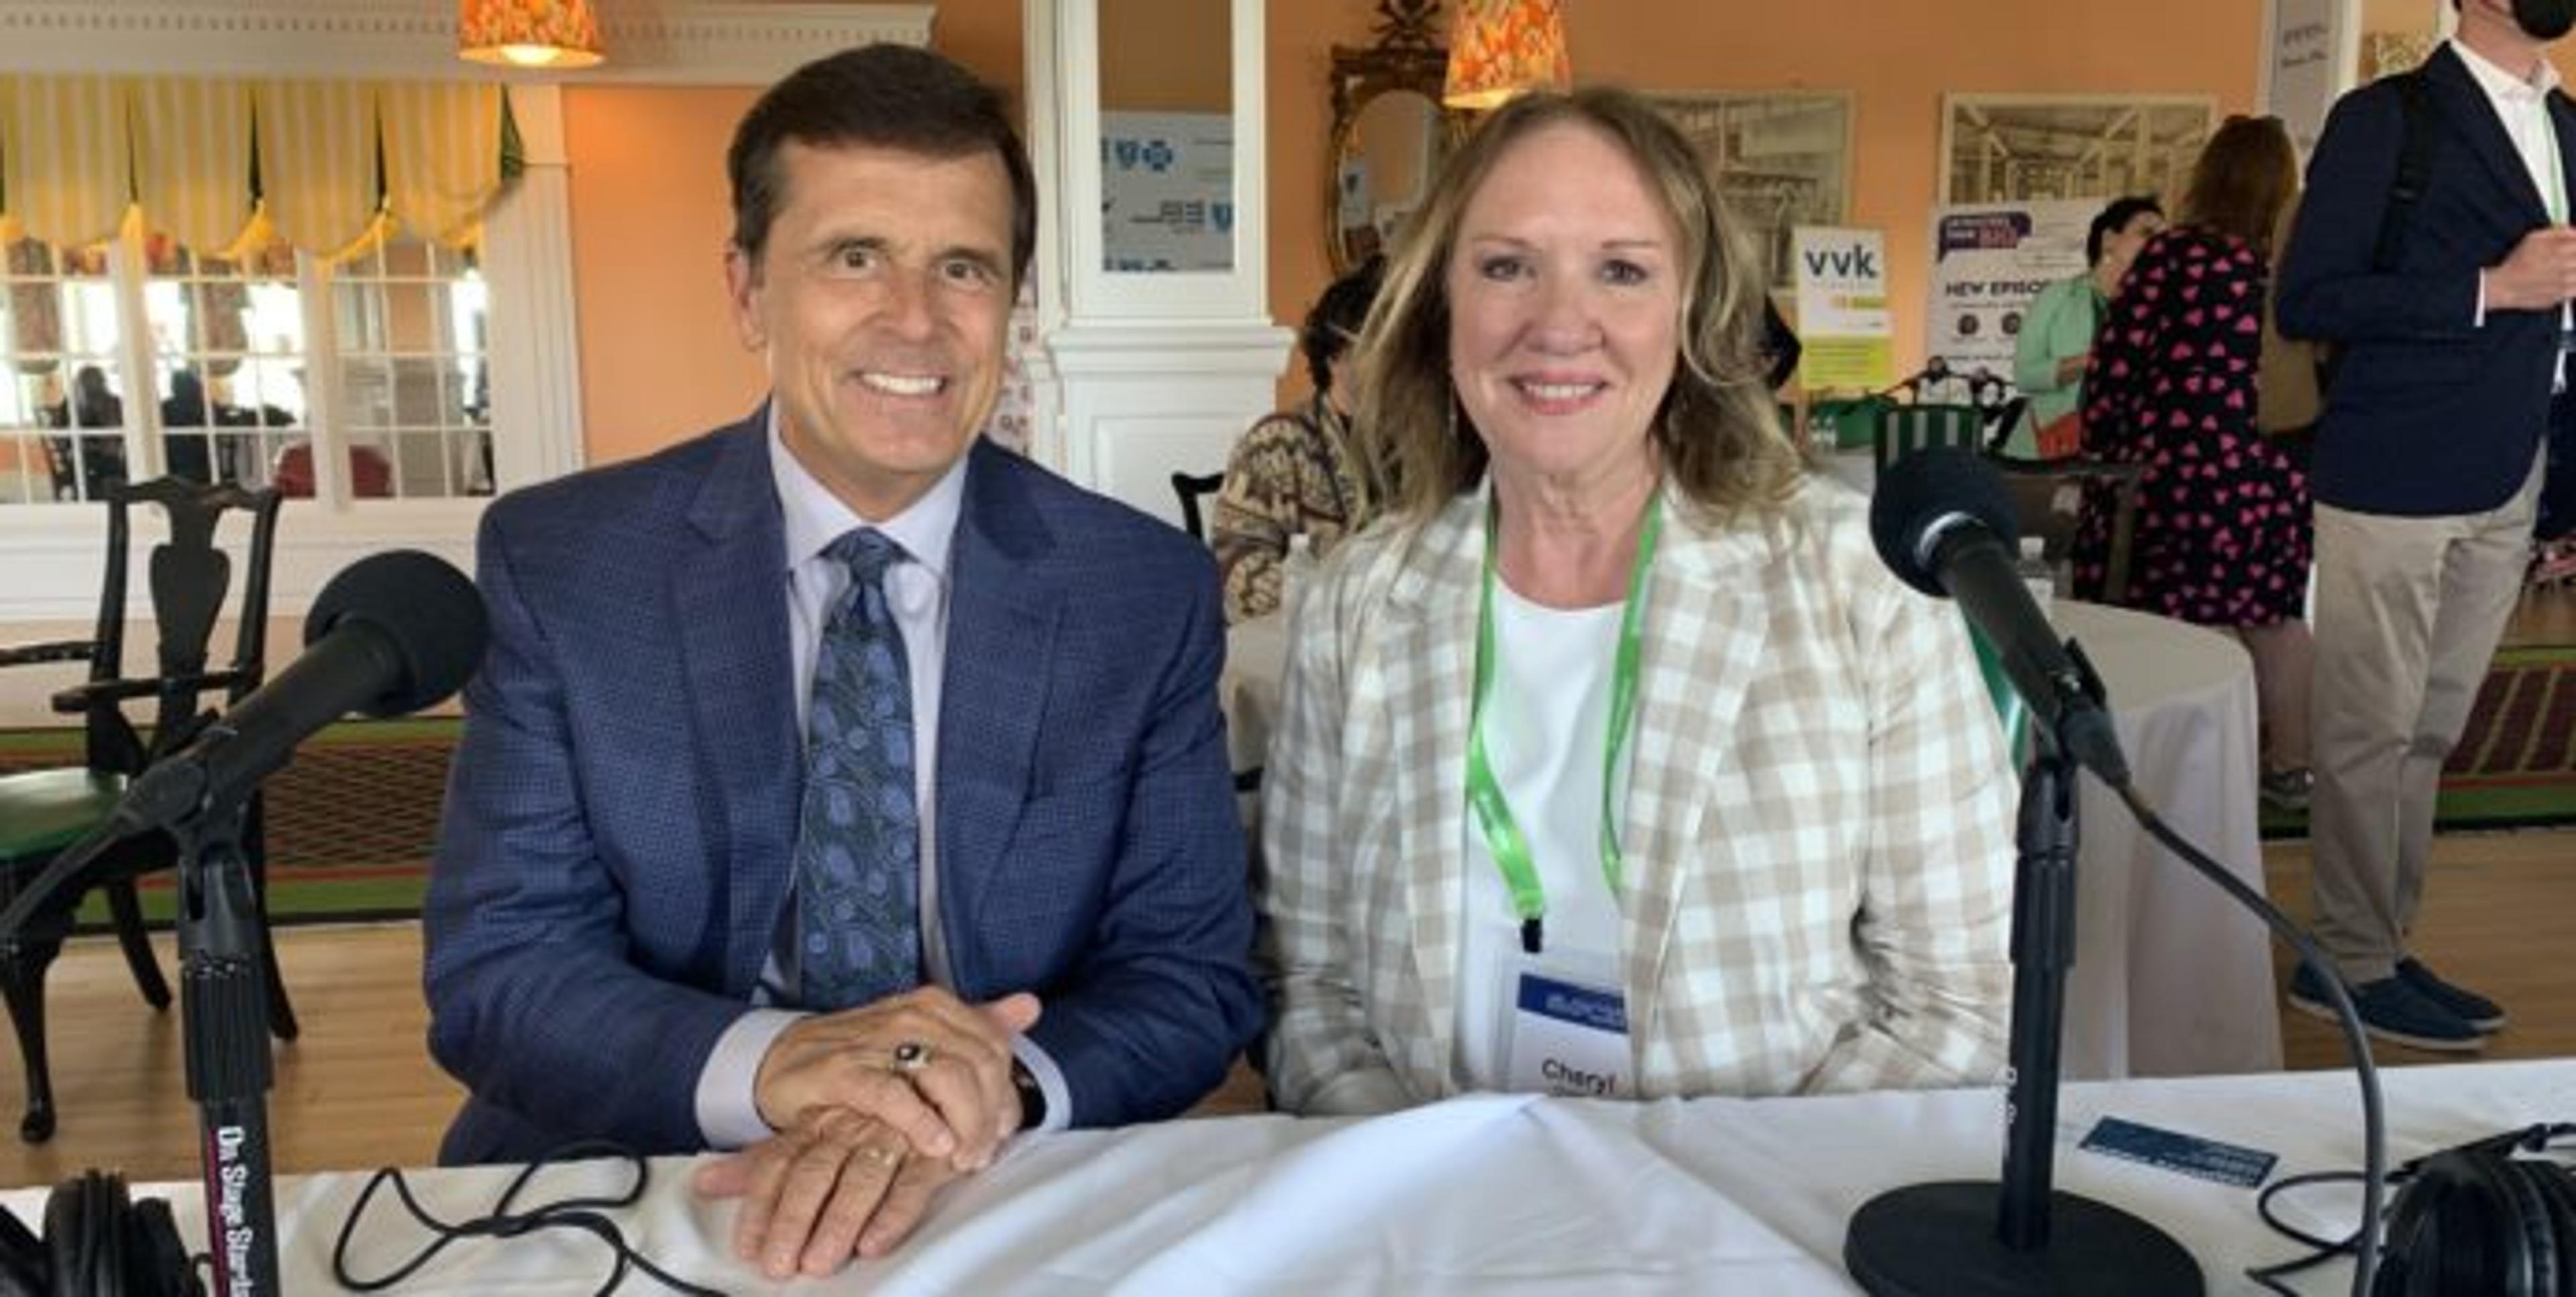 Chuck Gaidica with Cheryl Carrier at the Mackinac Policy Conference